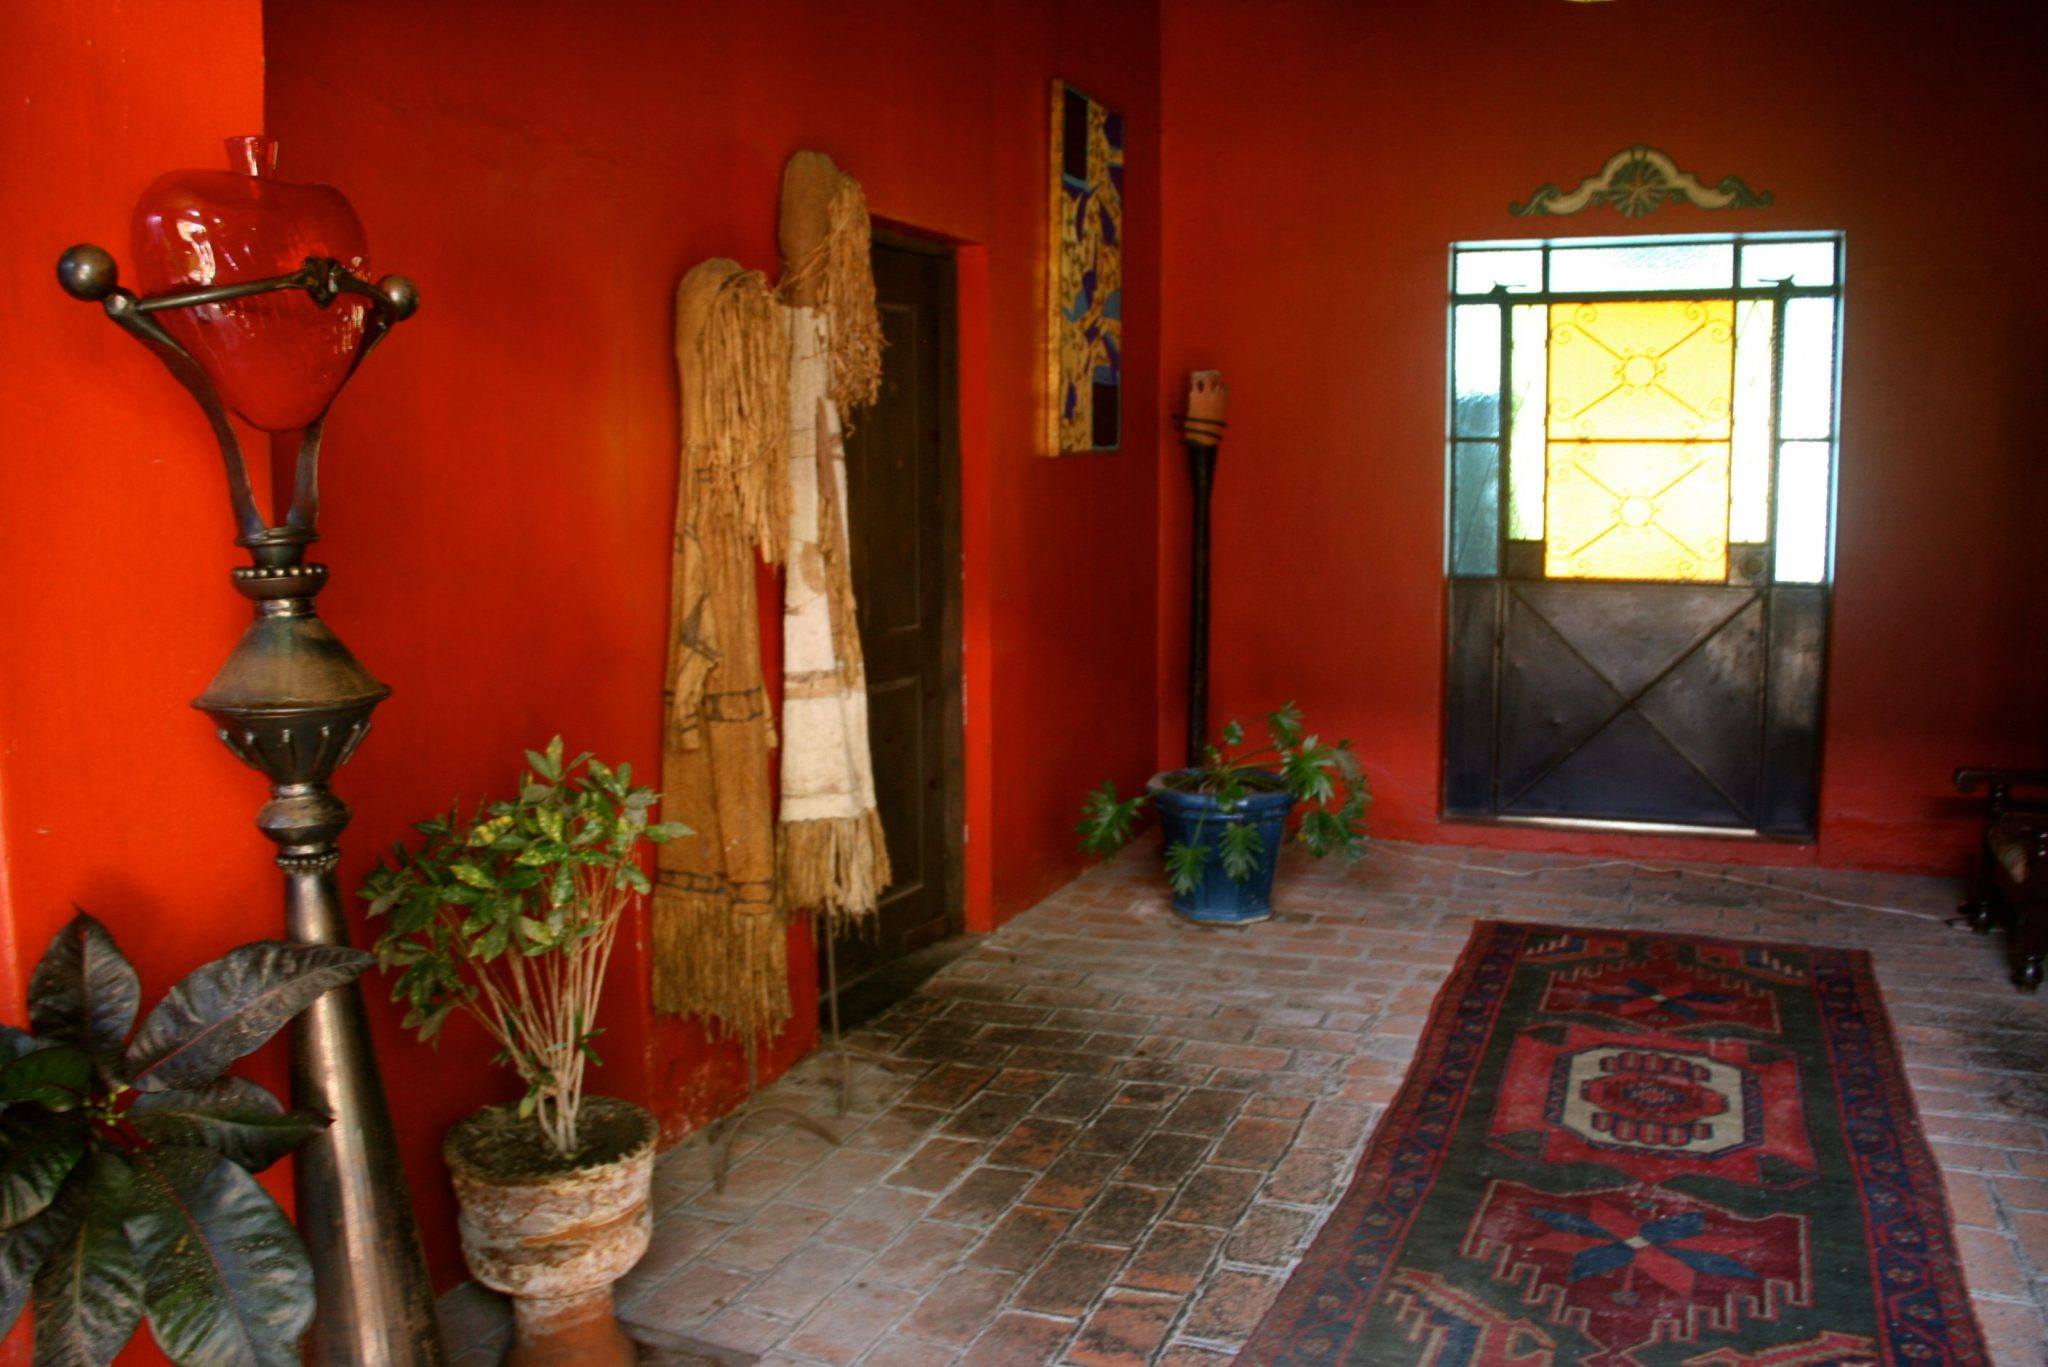 Pictures of Hotel California, Mexican decorating